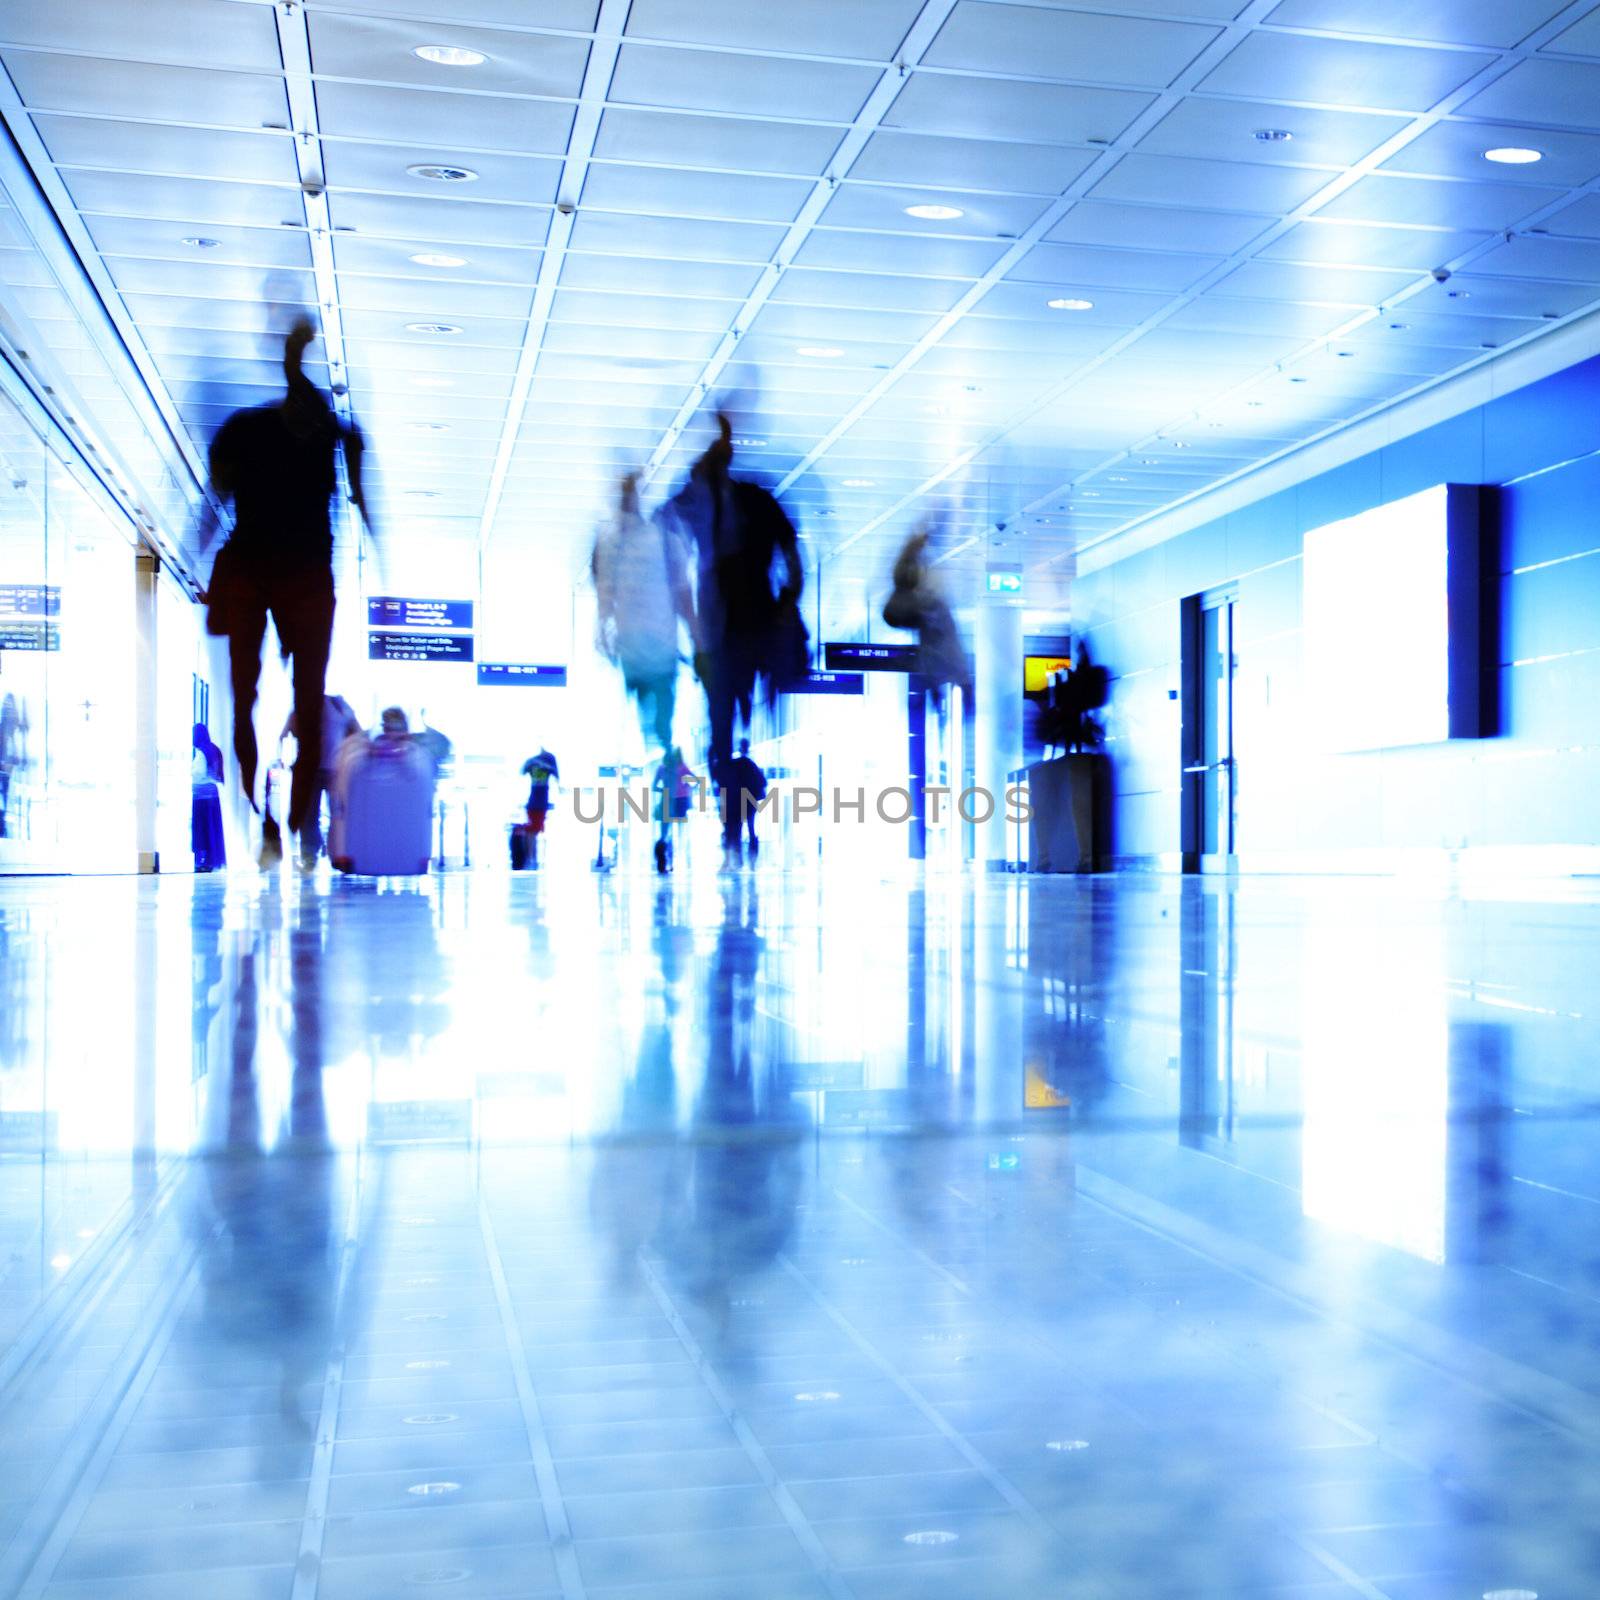 Passengers walking in contemporary hallway of airport